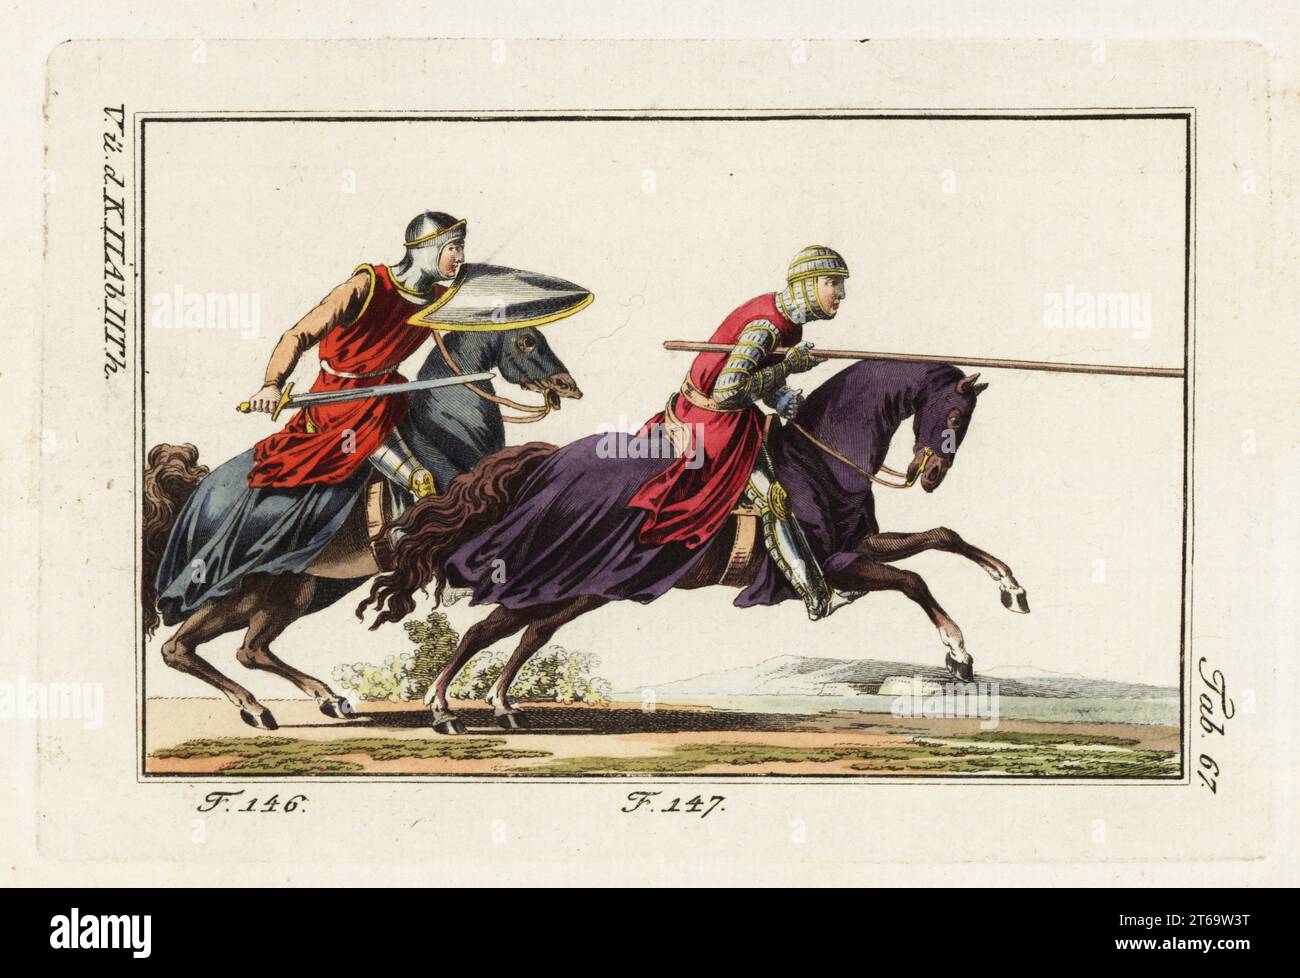 Norman cavalry charging, 12th century. One knight lightly armed with helmet and greaves (leg armour), sword and shield 146, one heavily armed with chainmail suit of armor, plate greaves and lance 147. Both wearing military surtouts on horses in caparisons. Handcolored copperplate engraving from Robert von Spalart's Historical Picture of the Costumes of the Principal People of Antiquity and Middle Ages, Vienna, 1802. Stock Photo